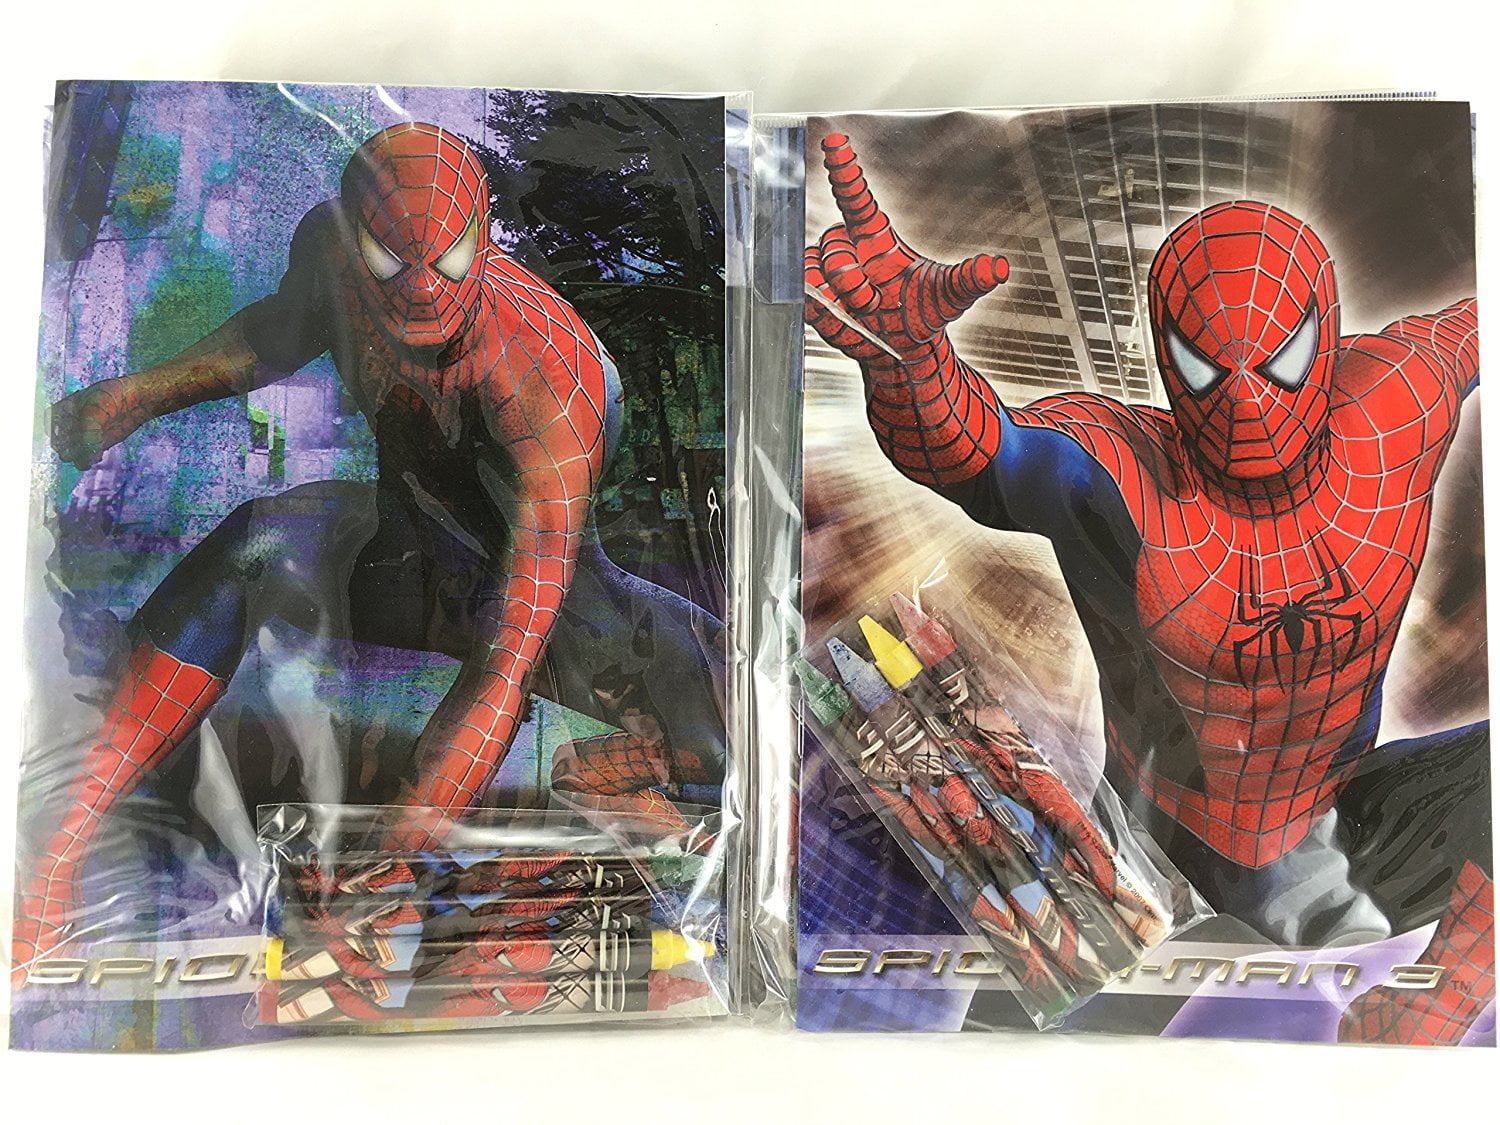 Luti Coloring Book Set Bundle with Spiderman Coloring Books, 12 Coloring  Pencils, Indoor Scavenger Hunt, and Activities